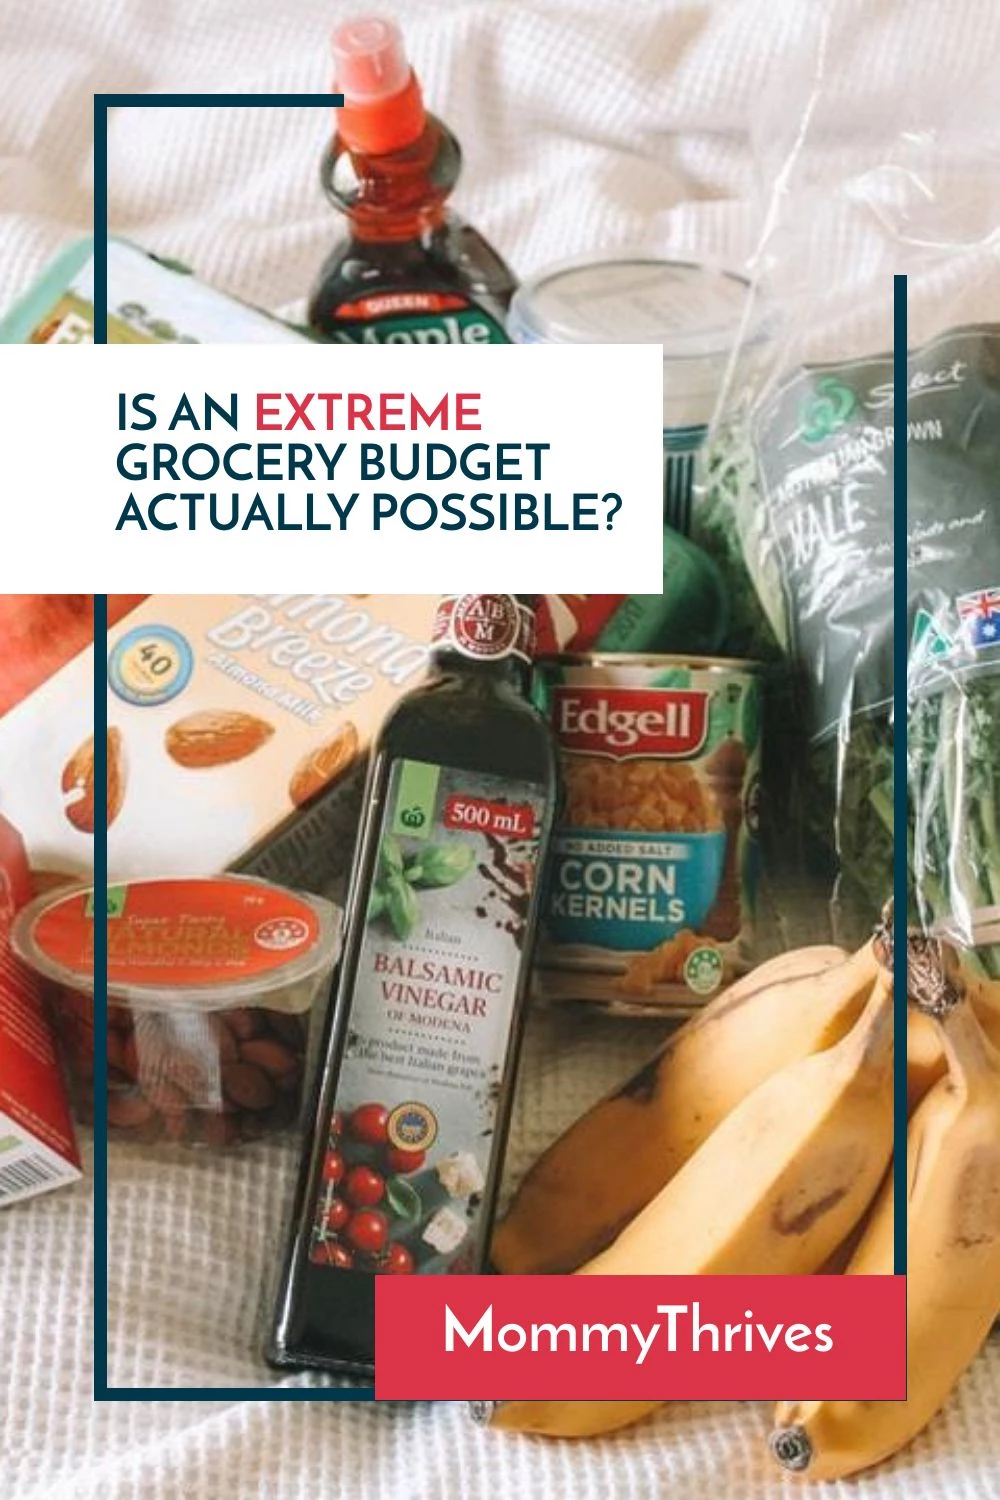 Saving Money On Grocery Shopping - Can You Live On An Extreme Grocery Budget - Extreme Grocery Budget Tactics To Use